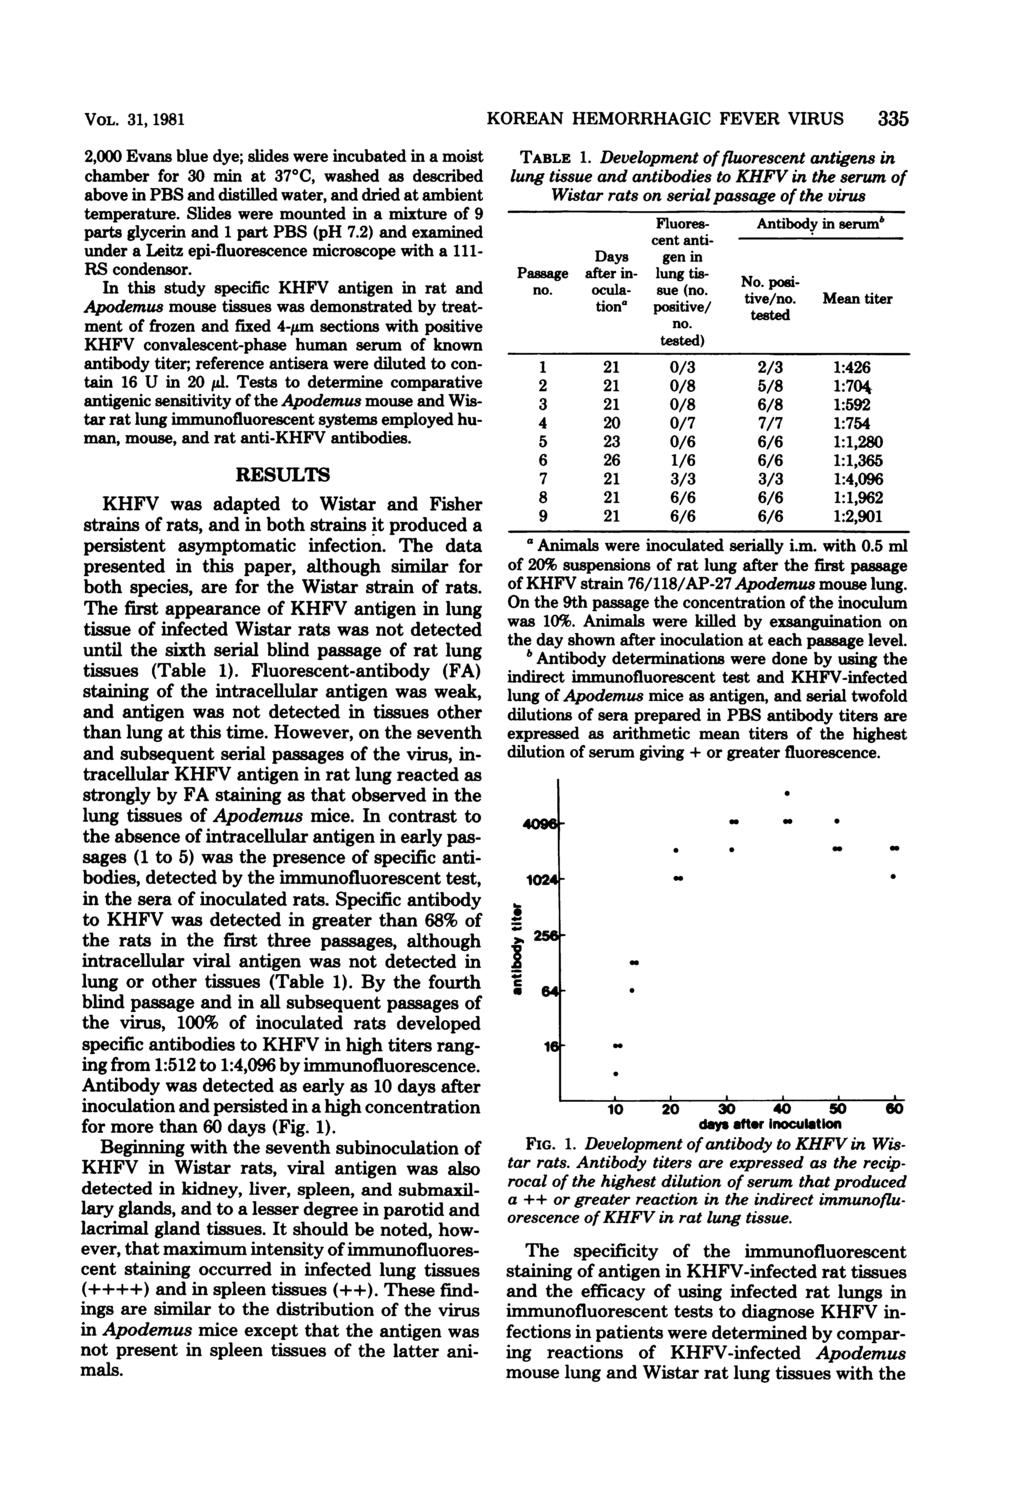 VOL. 31, 1981 2,000 Evans blue dye; slides were incubated in a moist chamber for 30 min at 37 C, washed as described above in PBS and distilled water, and dried at ambient temperature.